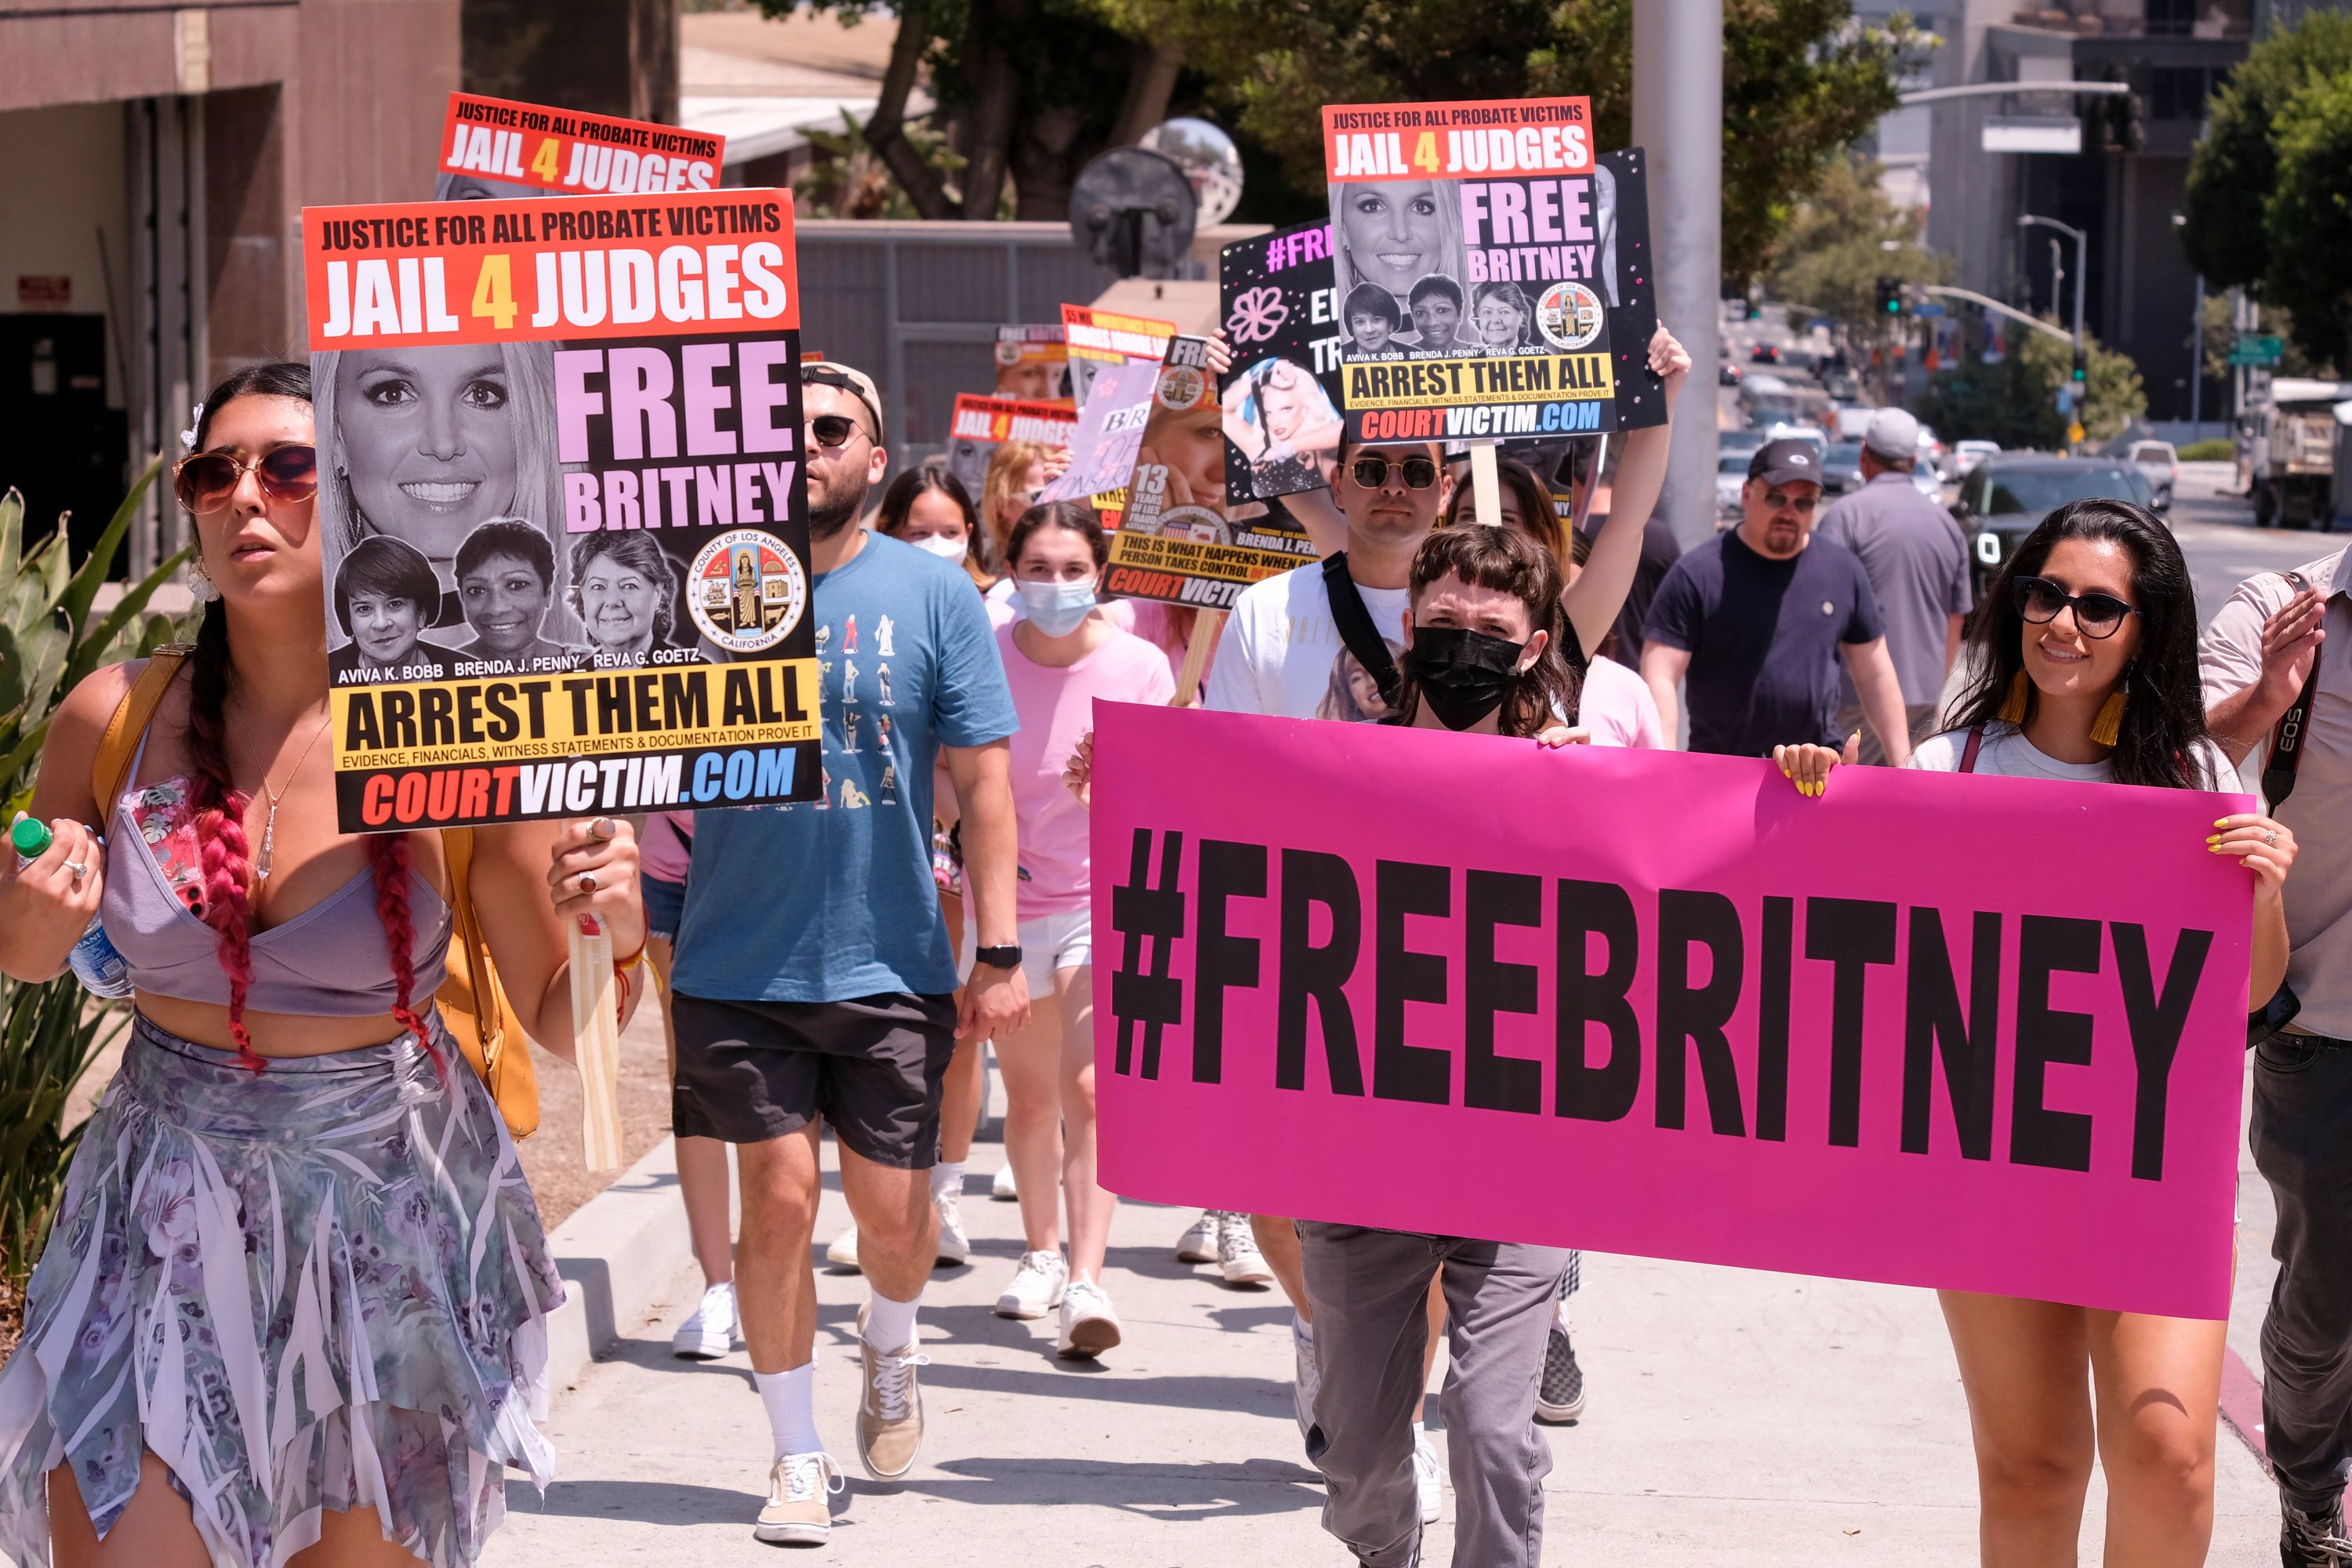 Protesters holding signs in support of ending the conservatorship of Britney Spears